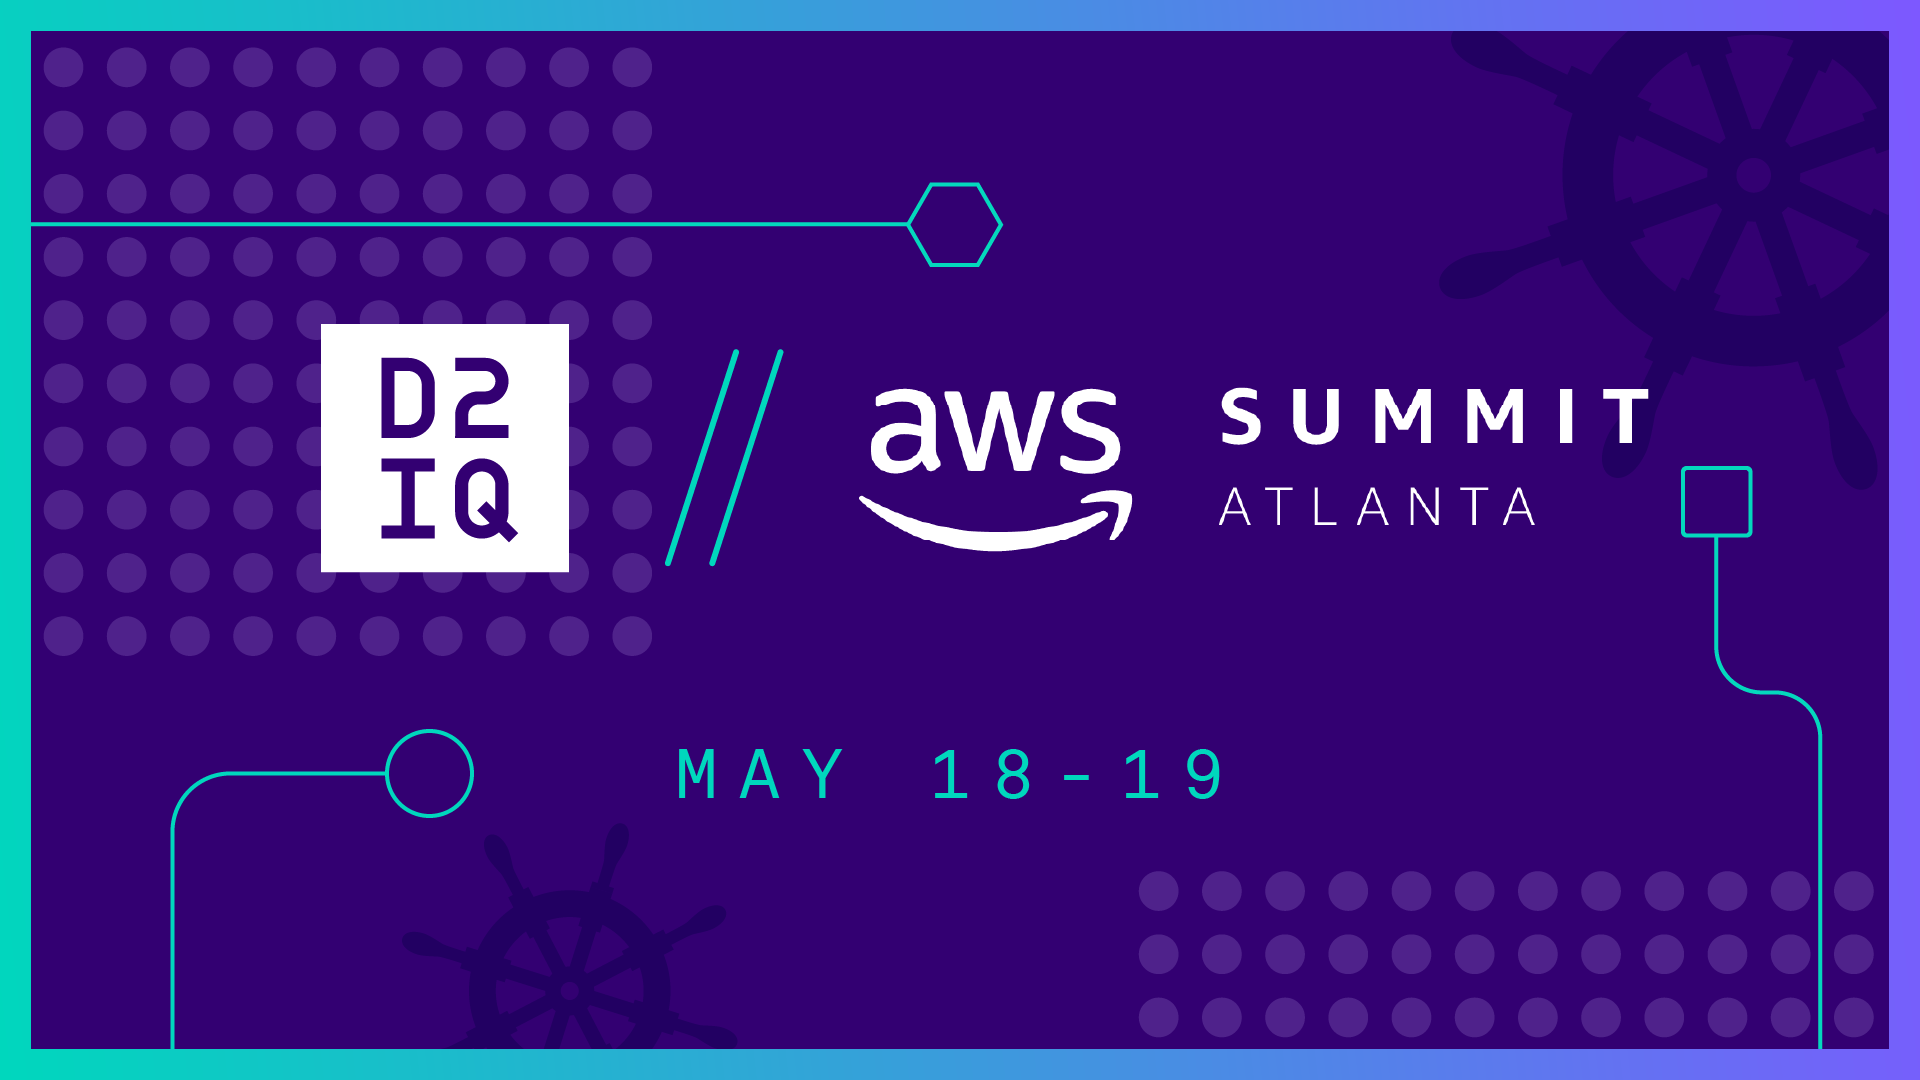 Get Smart: Join Us at the AWS Summit in Atlanta